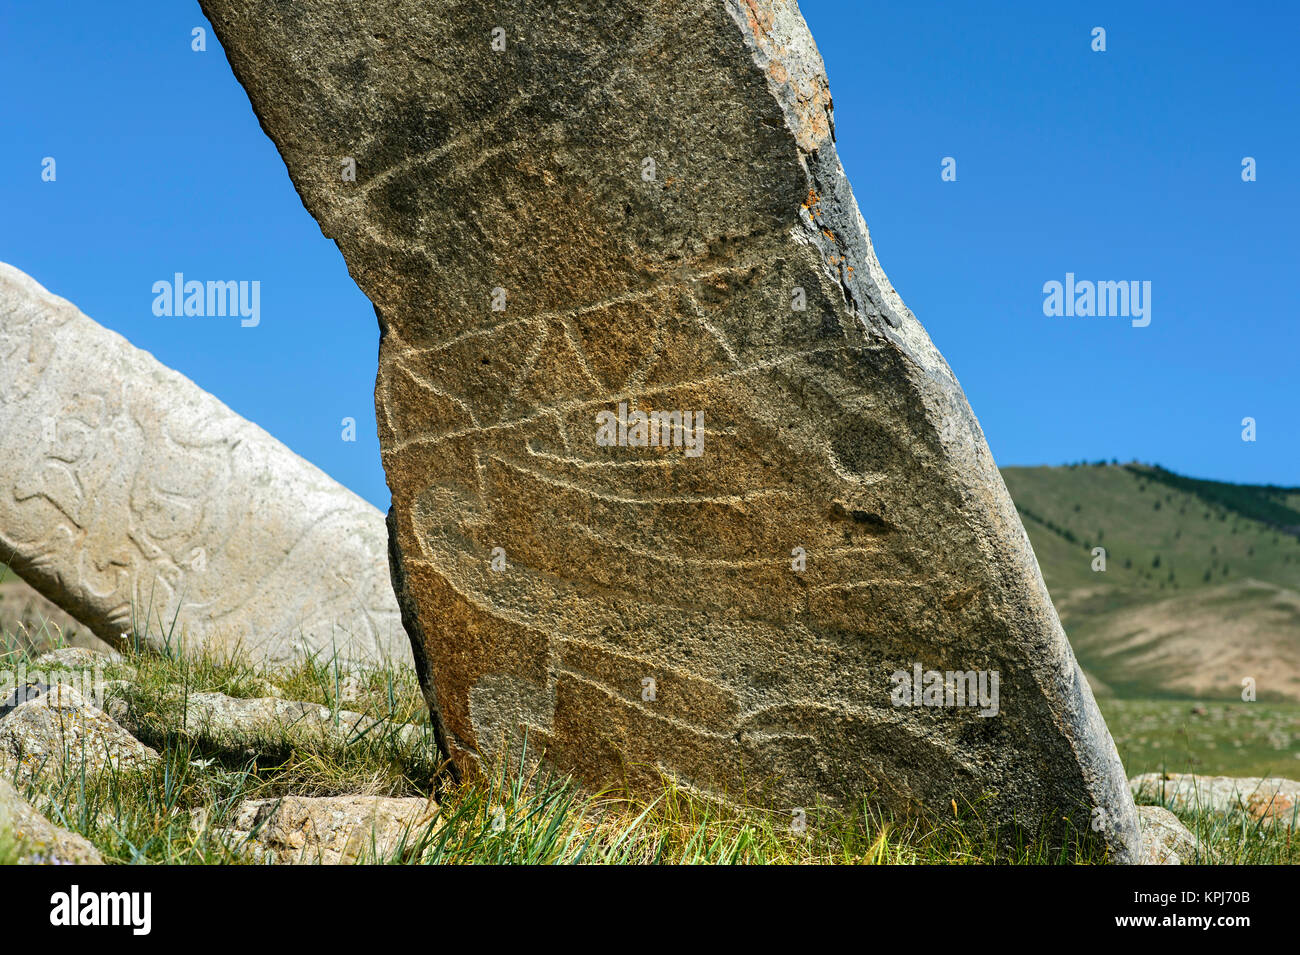 Stone stele with engravings, called deer stone, tombstone from the late Bronze Age, Khangai Nuruu National Park Stock Photo